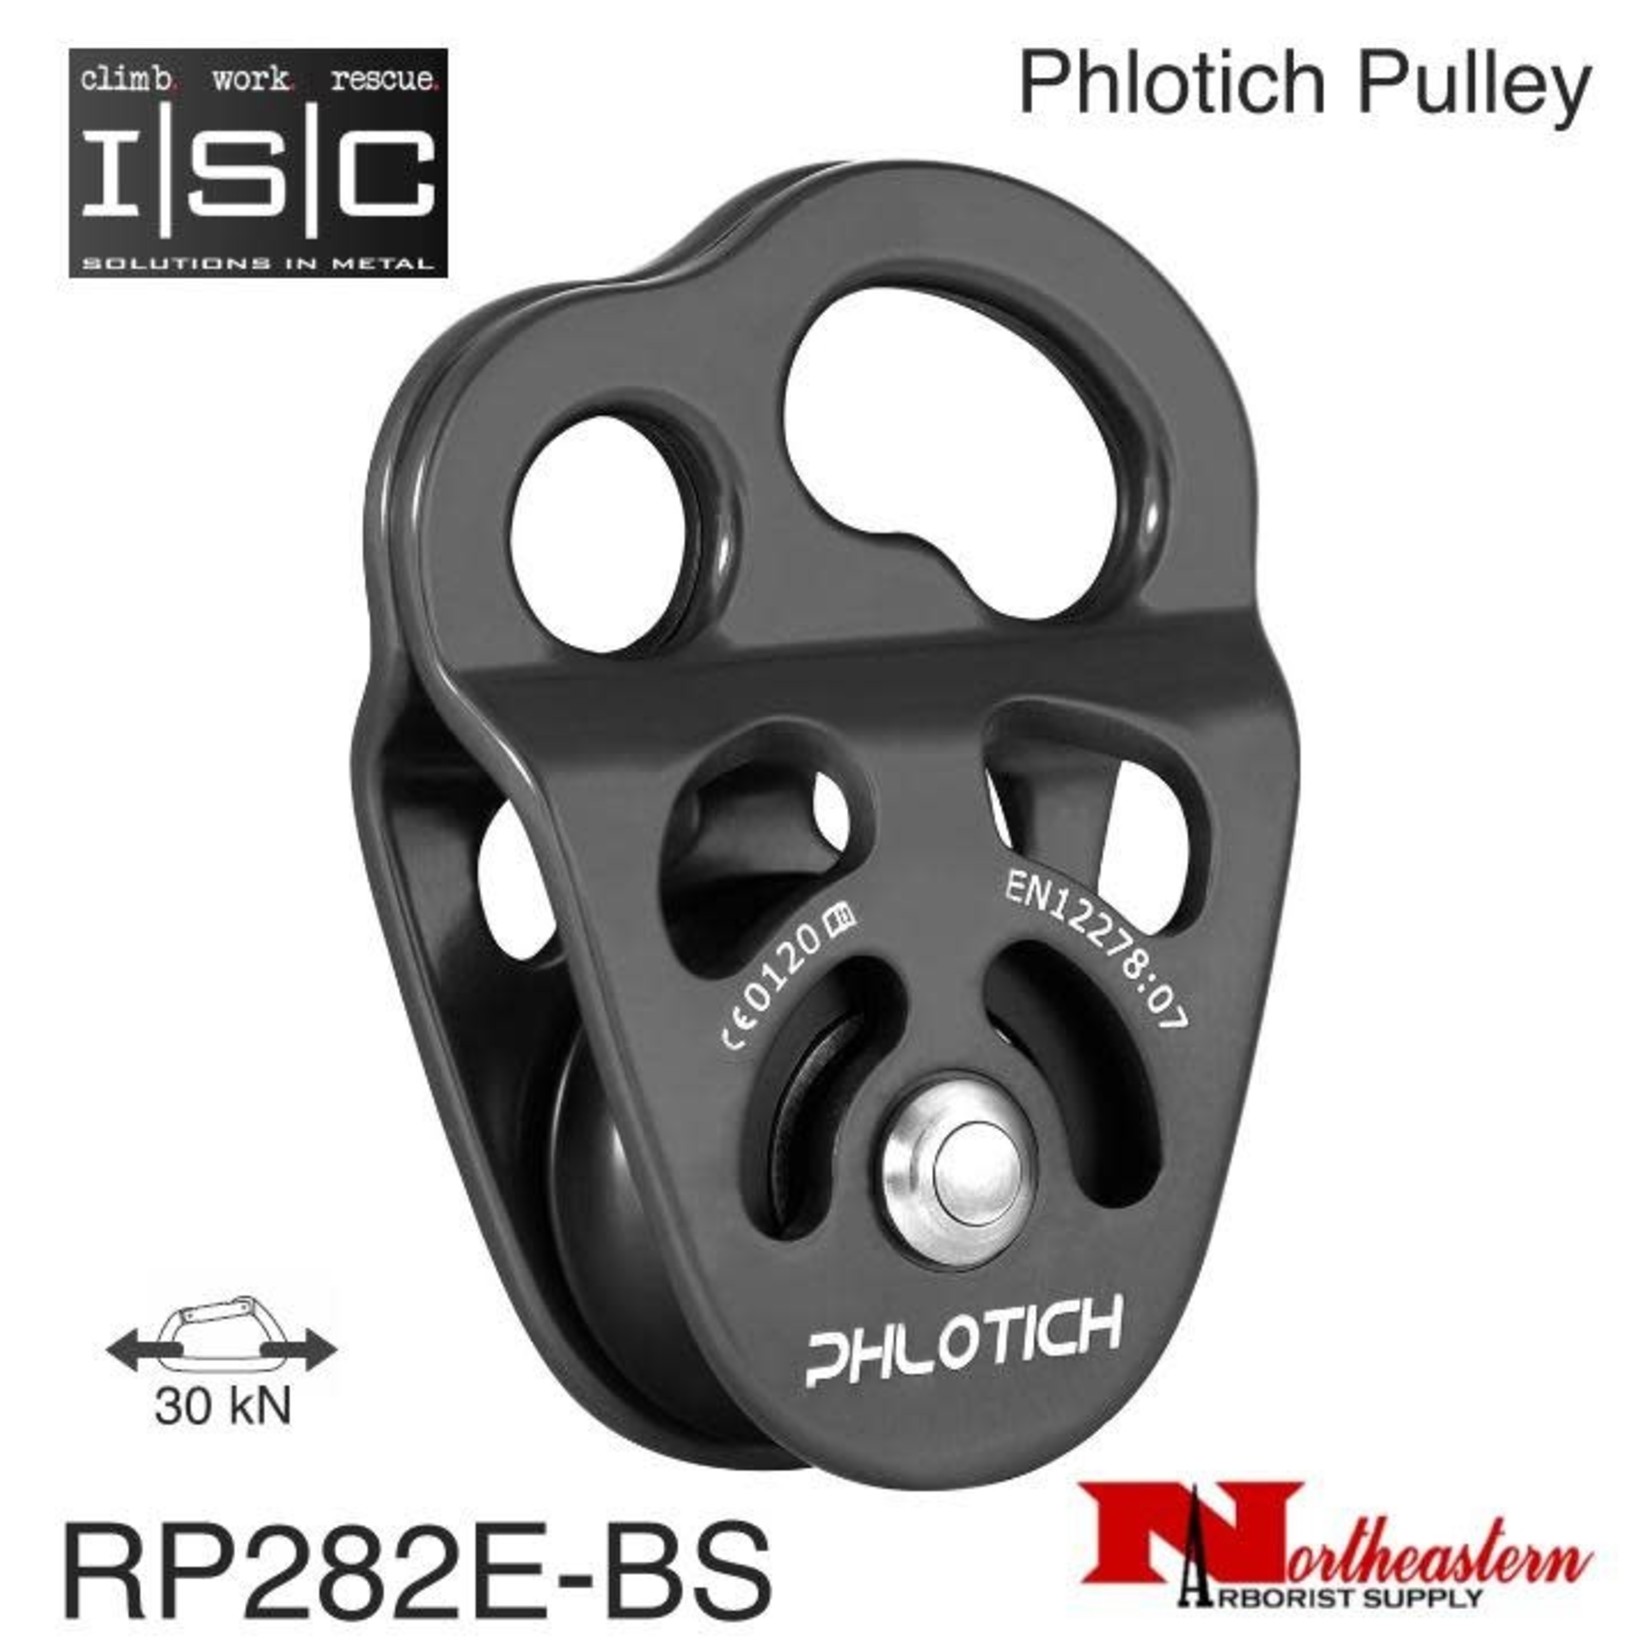 ISC Pulley Phlotich Gray With Bushings 30kN 1/2" Rope Max.